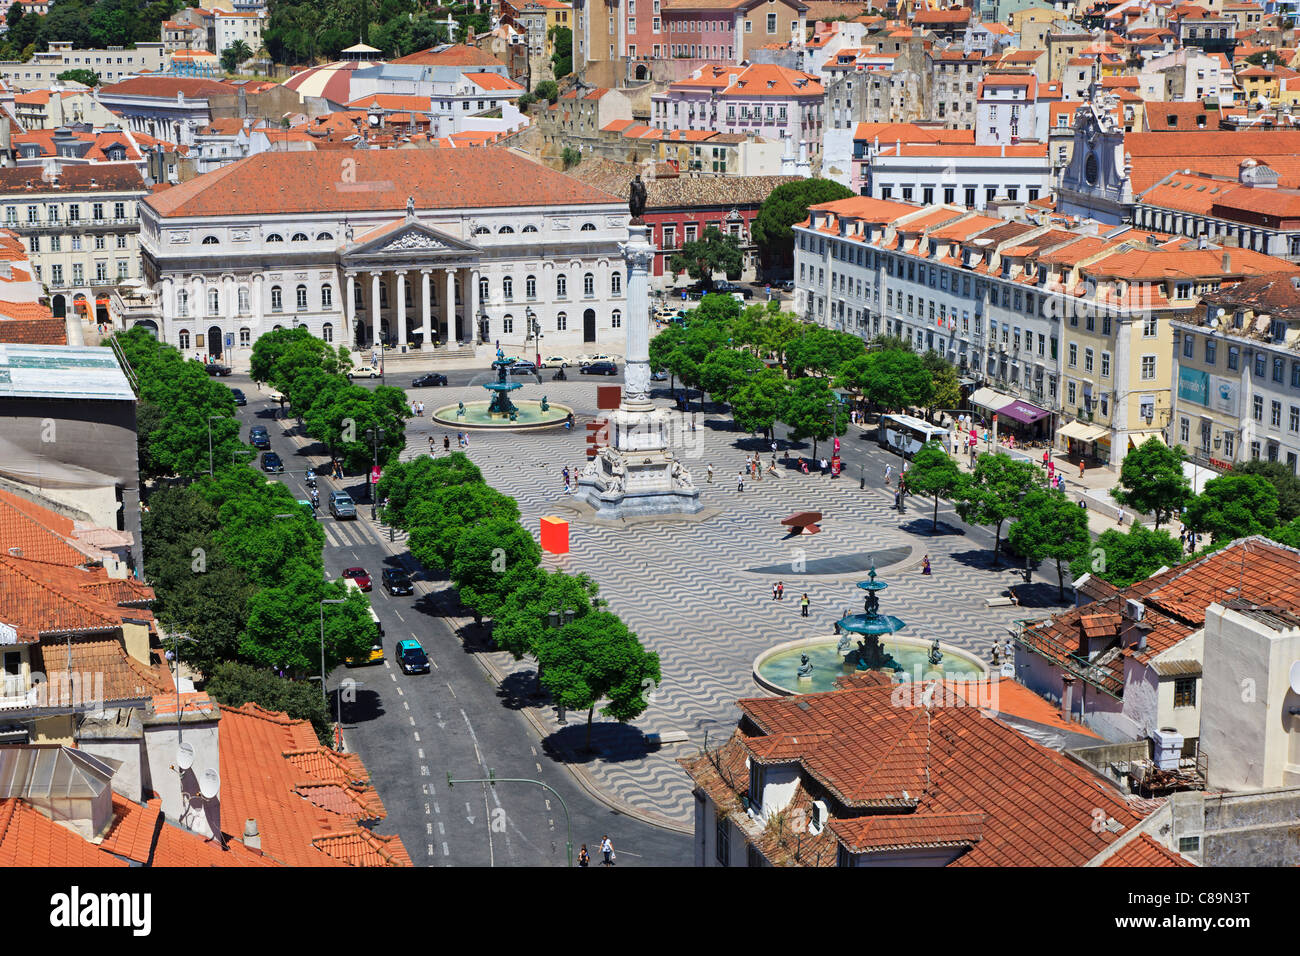 Europe, Portugal, Lisbon, View of city square with statue of Dom Pedro IV Stock Photo